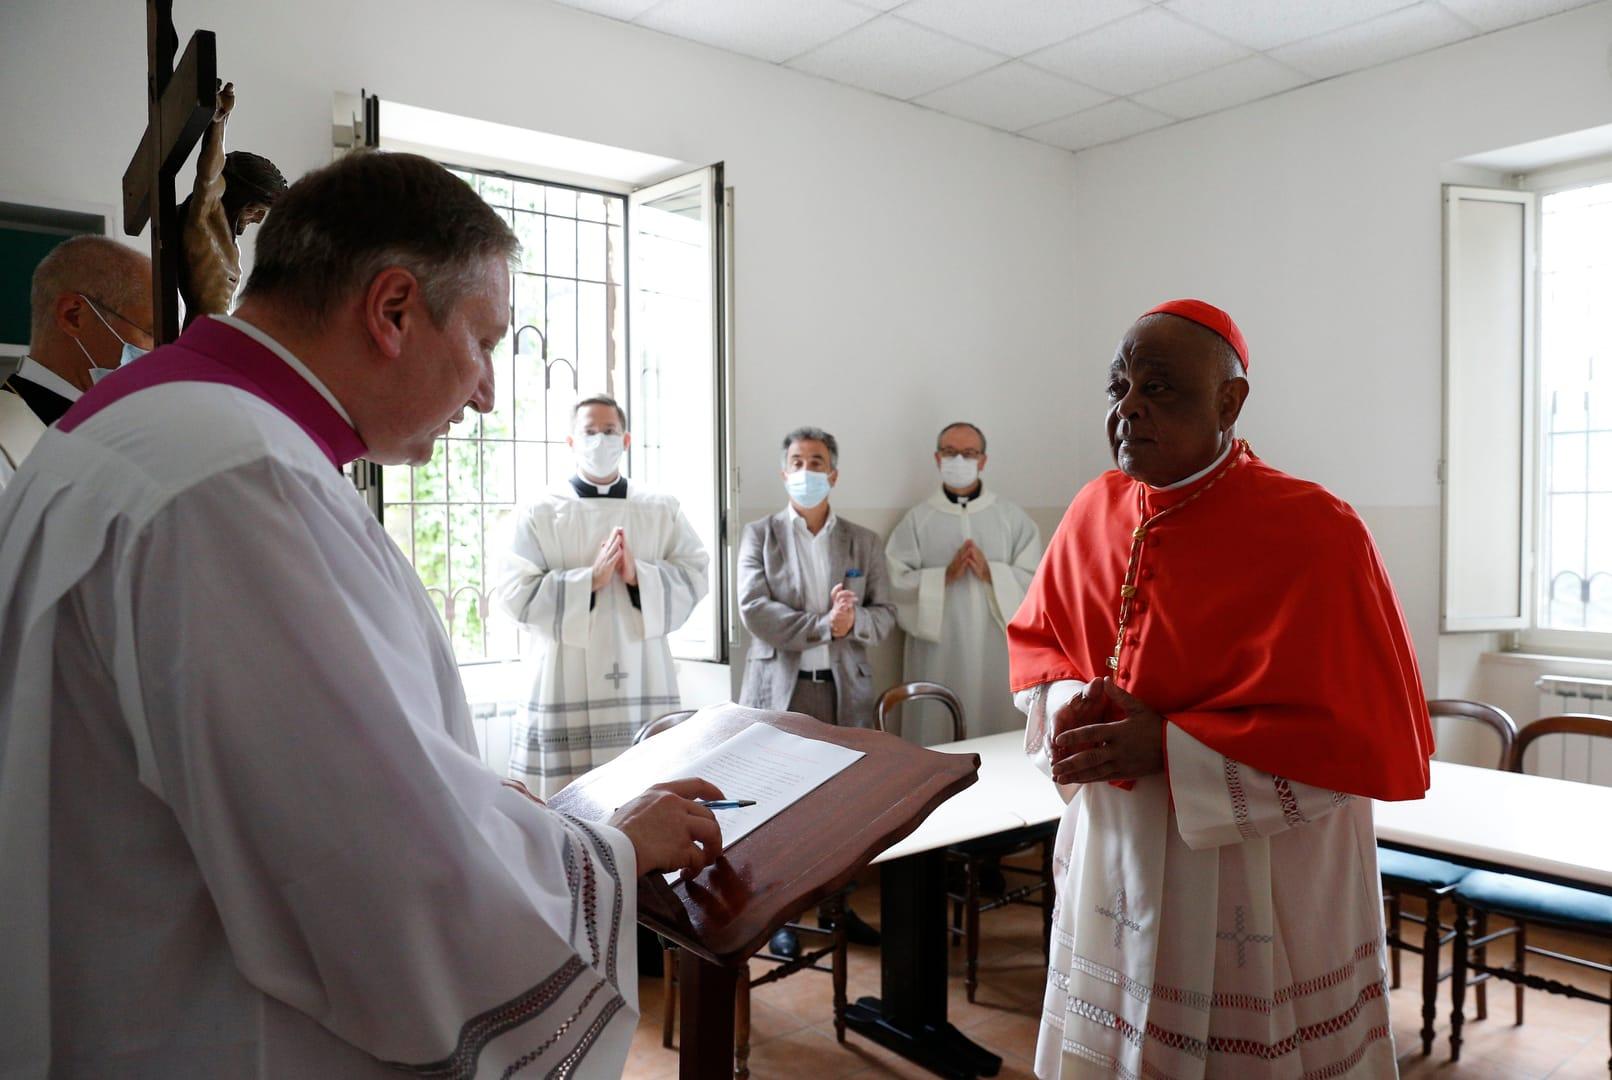 Cardinal Gregory seals his relationship with the Diocese of Rome